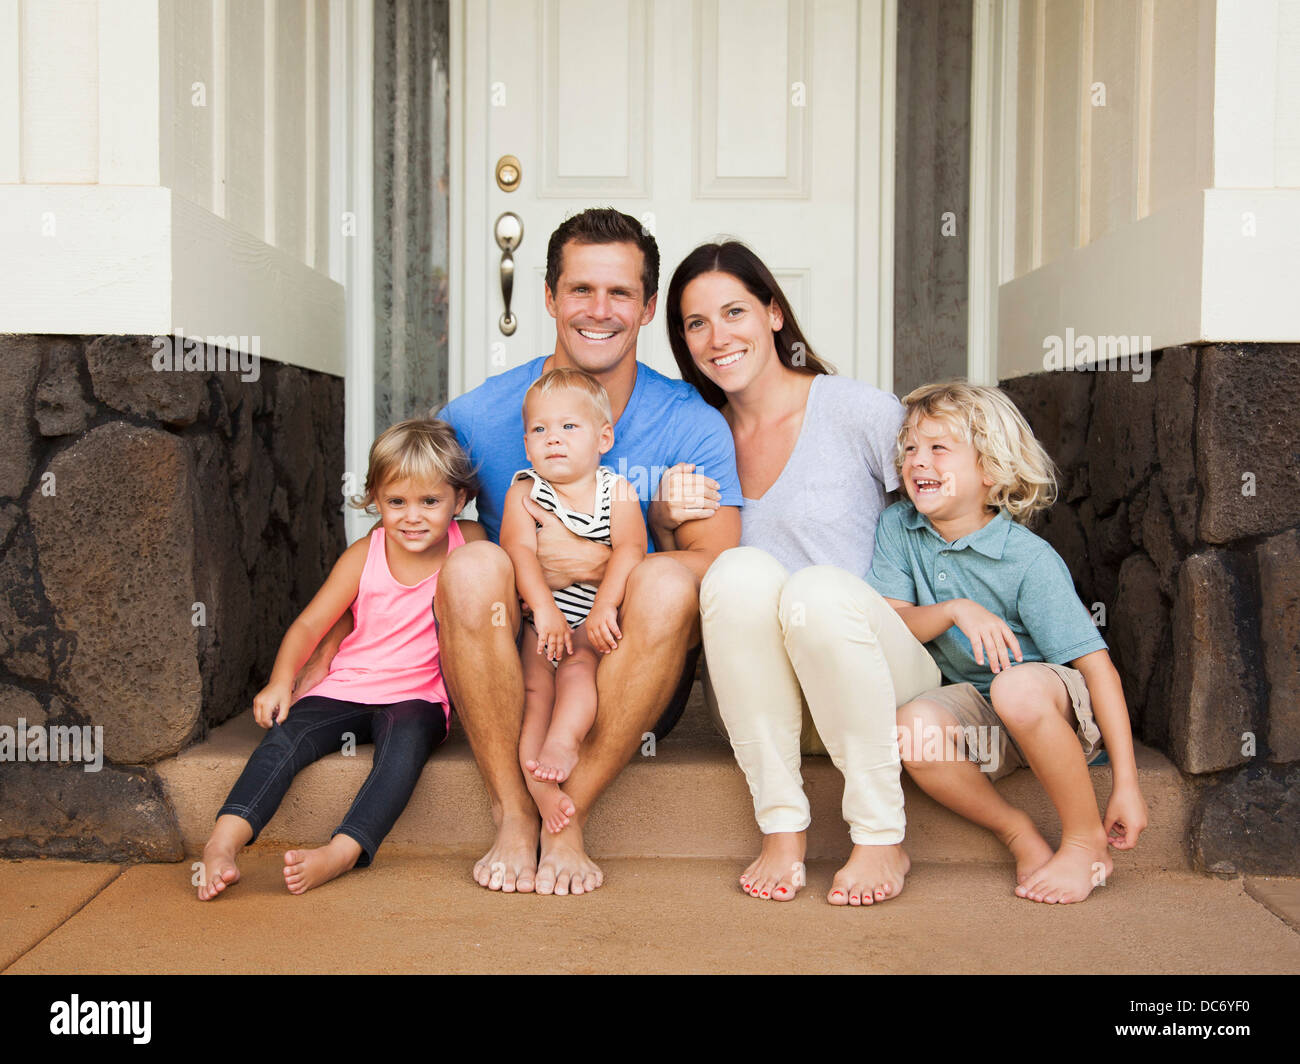 Family with three kids (6-7, 2-3, 6-11 months) sitting in front of house Stock Photo